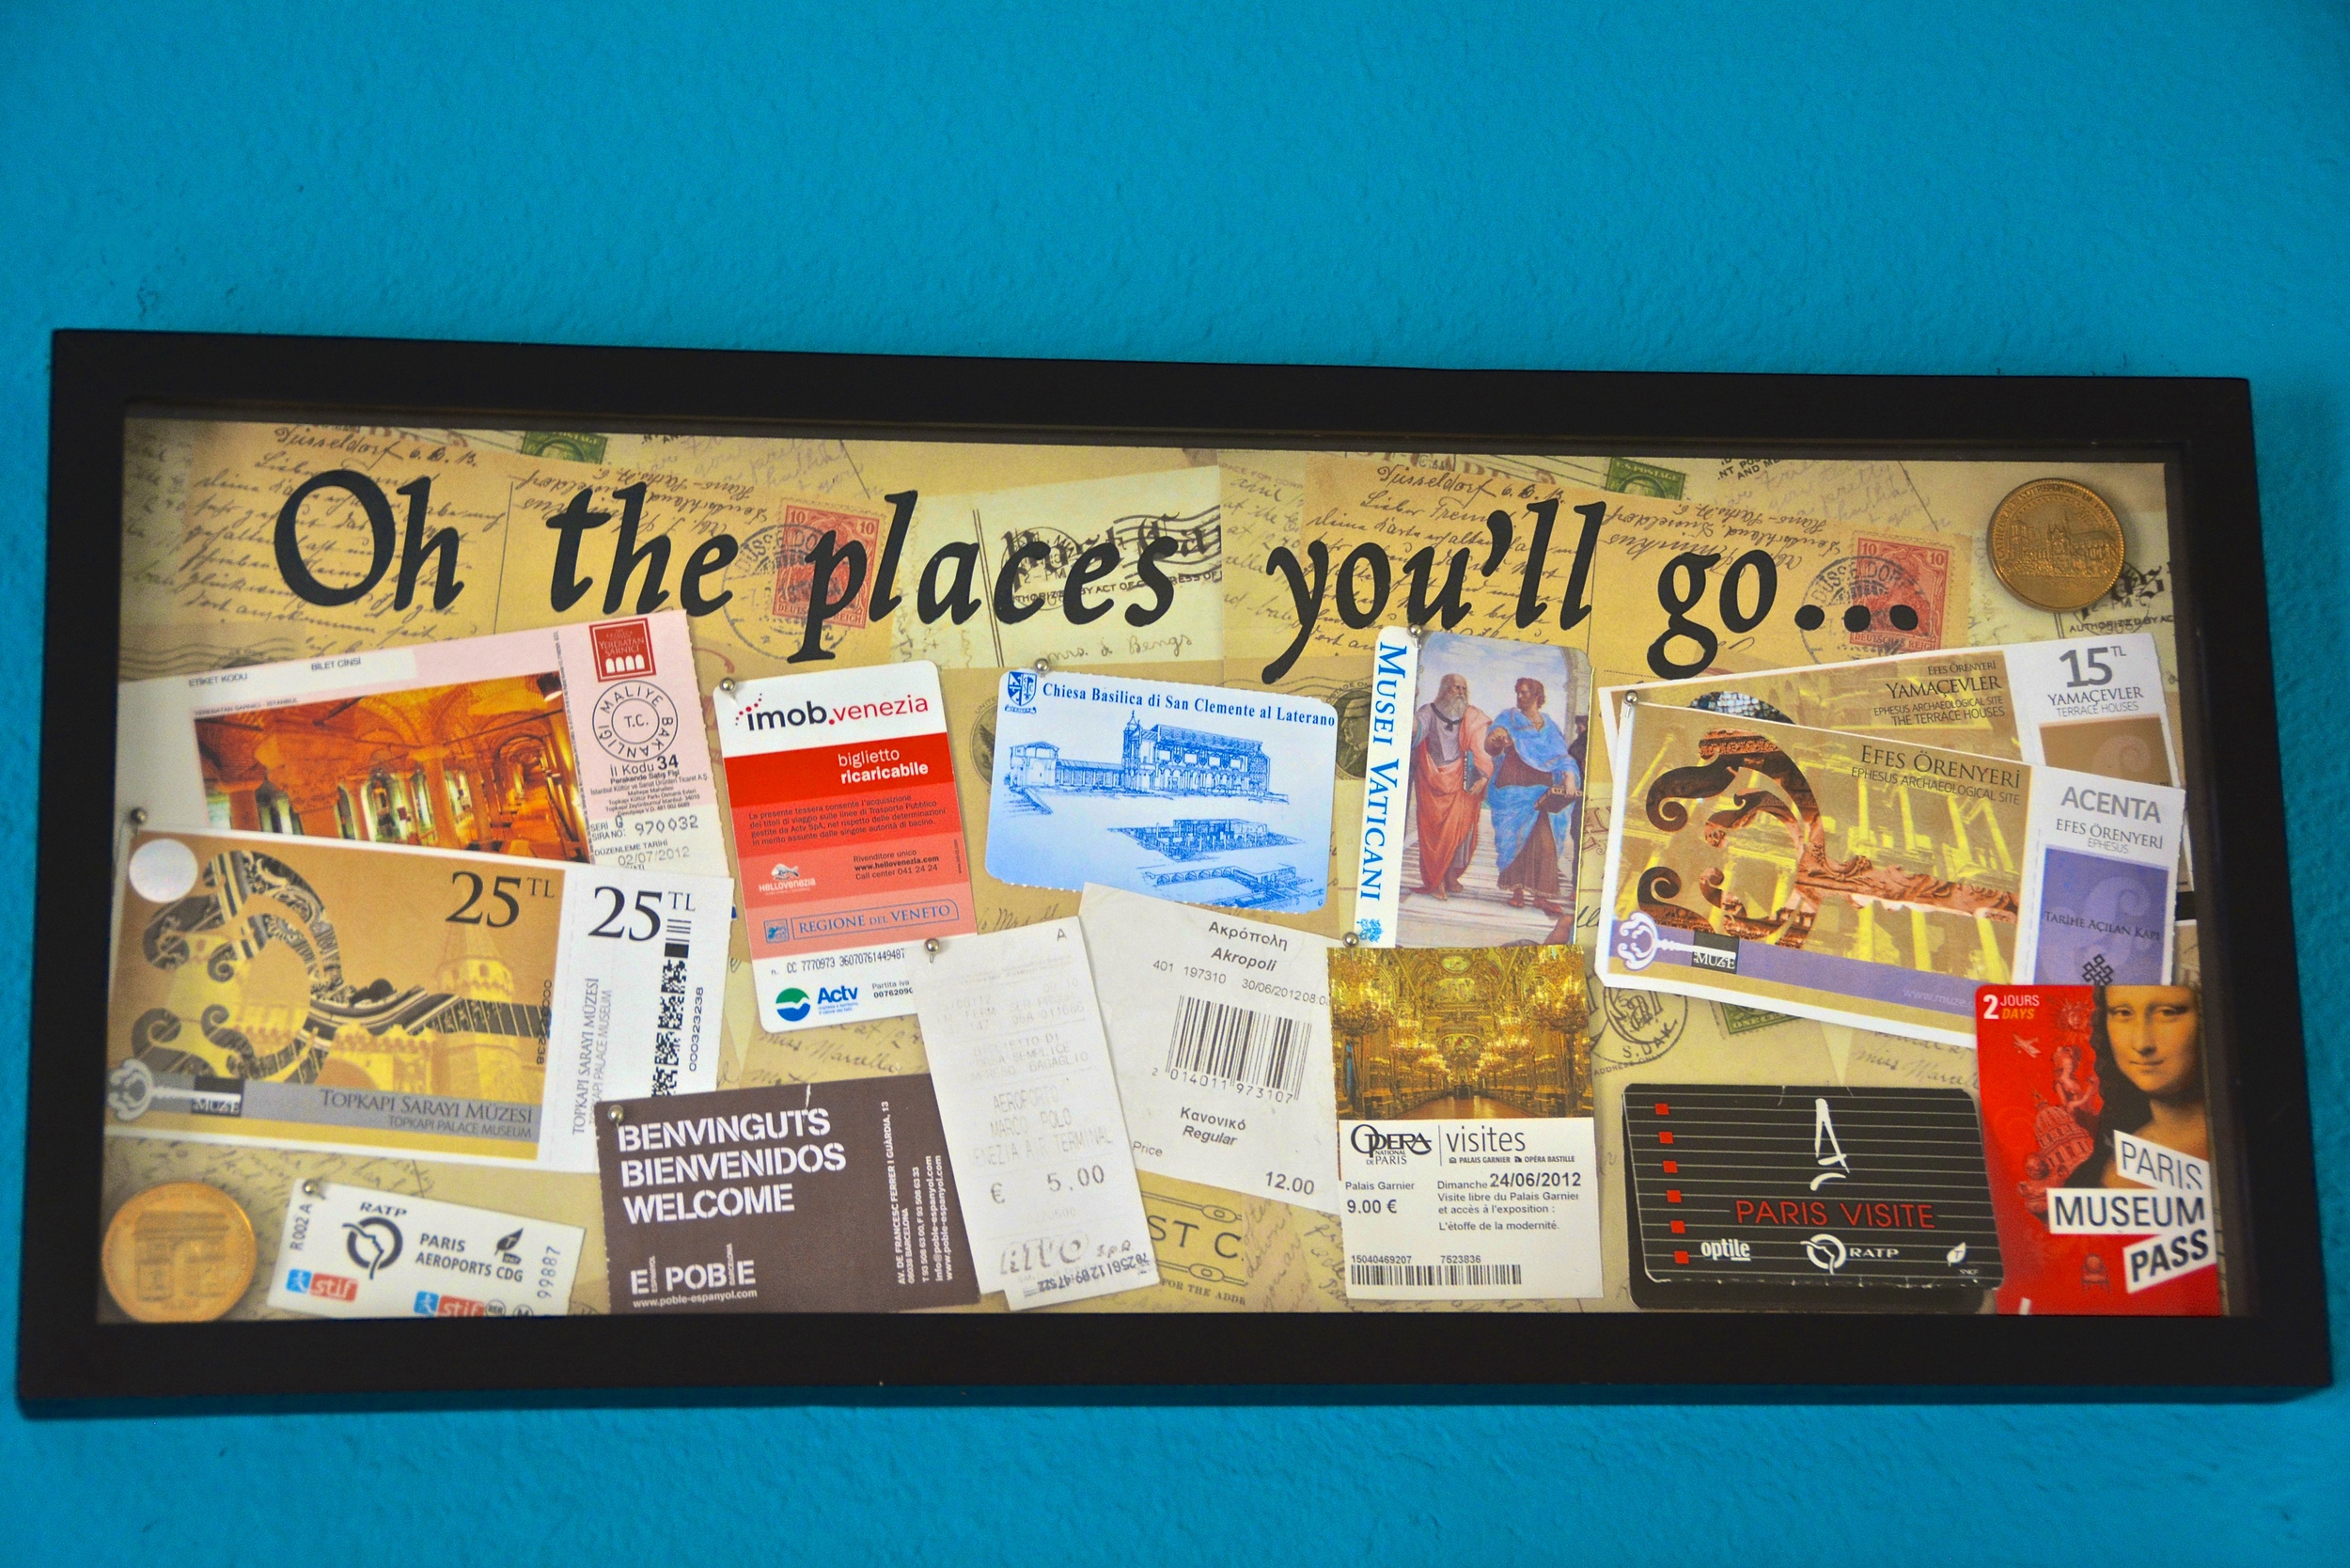 DIY Crafts from Travel Souvenirs: Make a Shadow Box